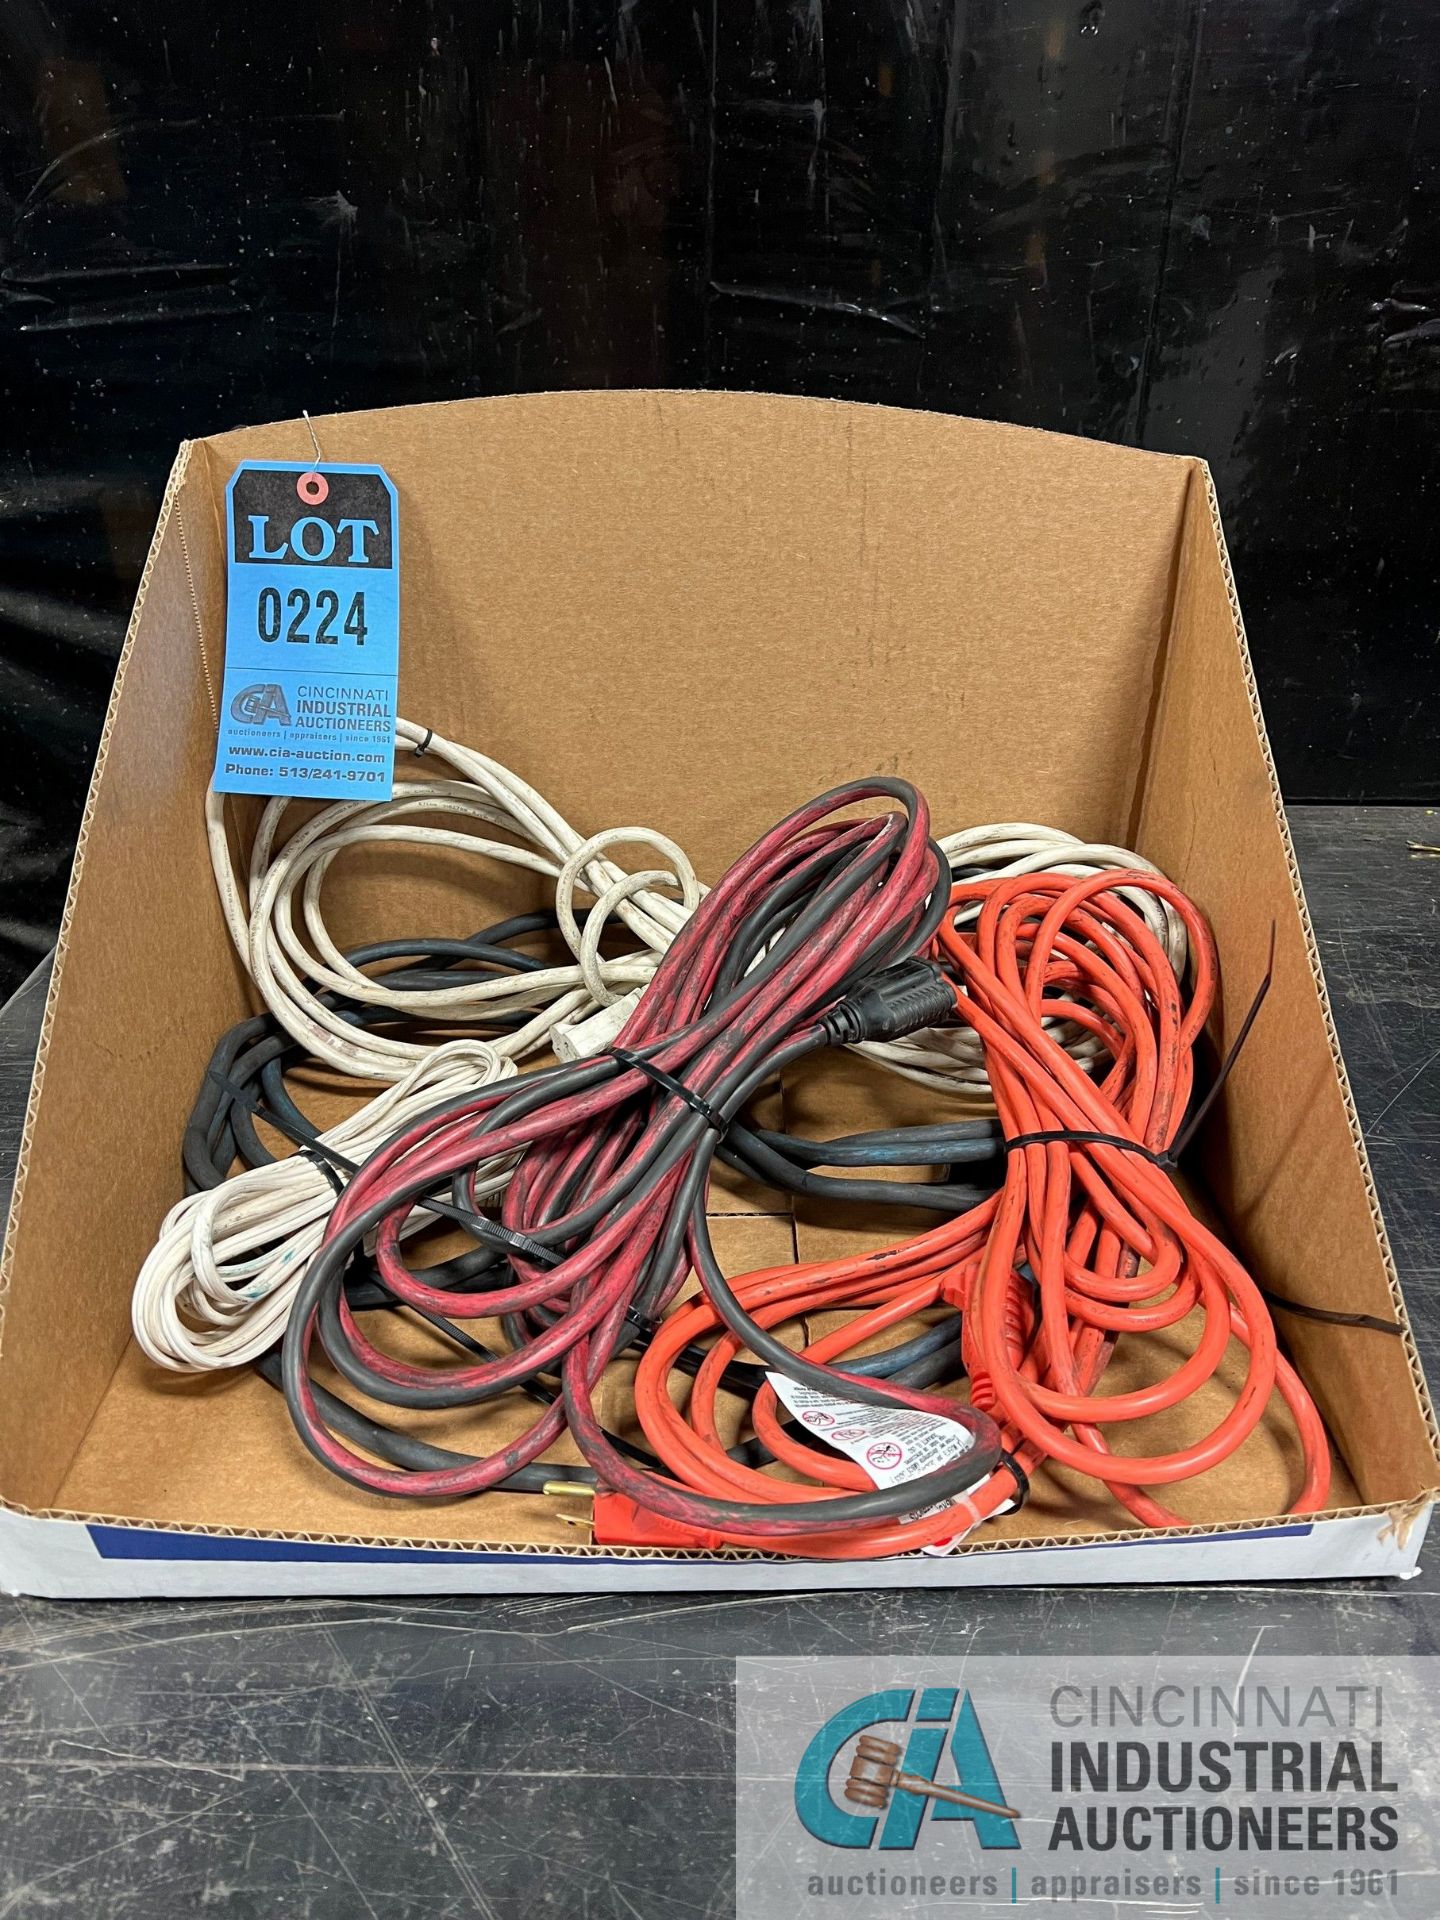 MISC EXTENSION CORDS **LOCATED AT 235 FACTORY STREET, LA PORTE, INDIANA 46350**